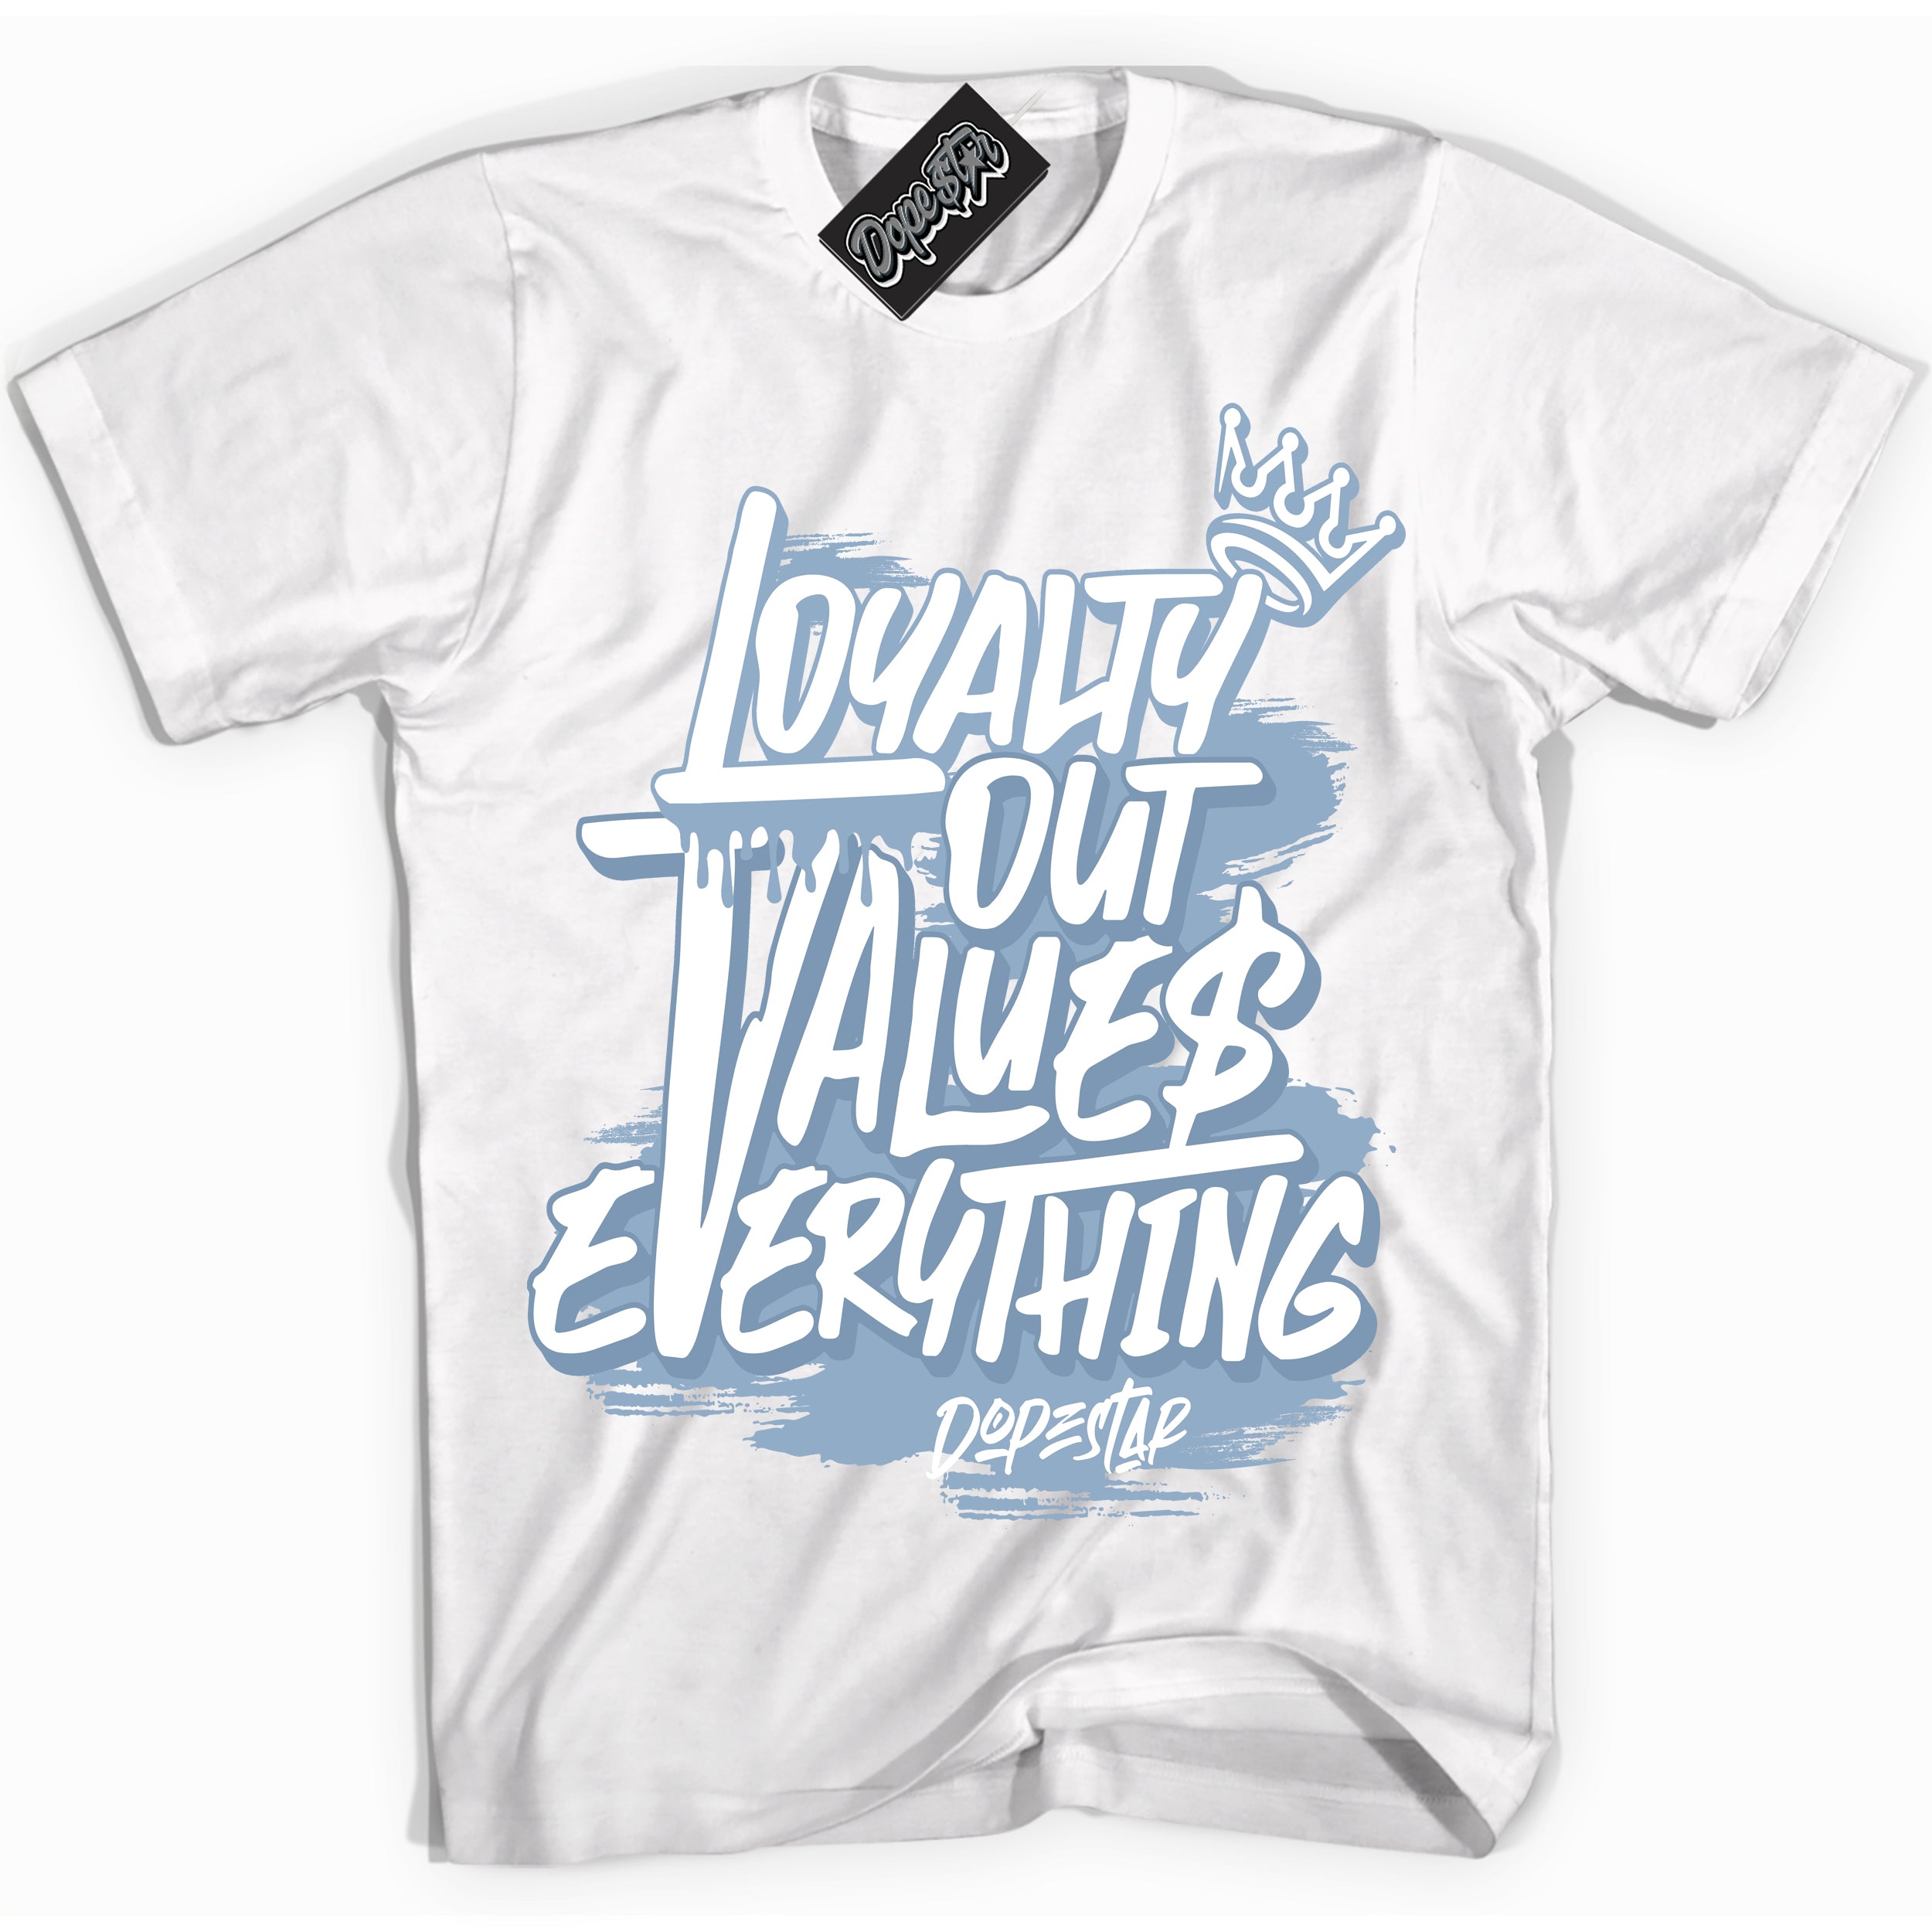 Cool White Shirt with “ Loyalty Out Values Everything” design that perfectly matches Aluminum 1s Sneakers.